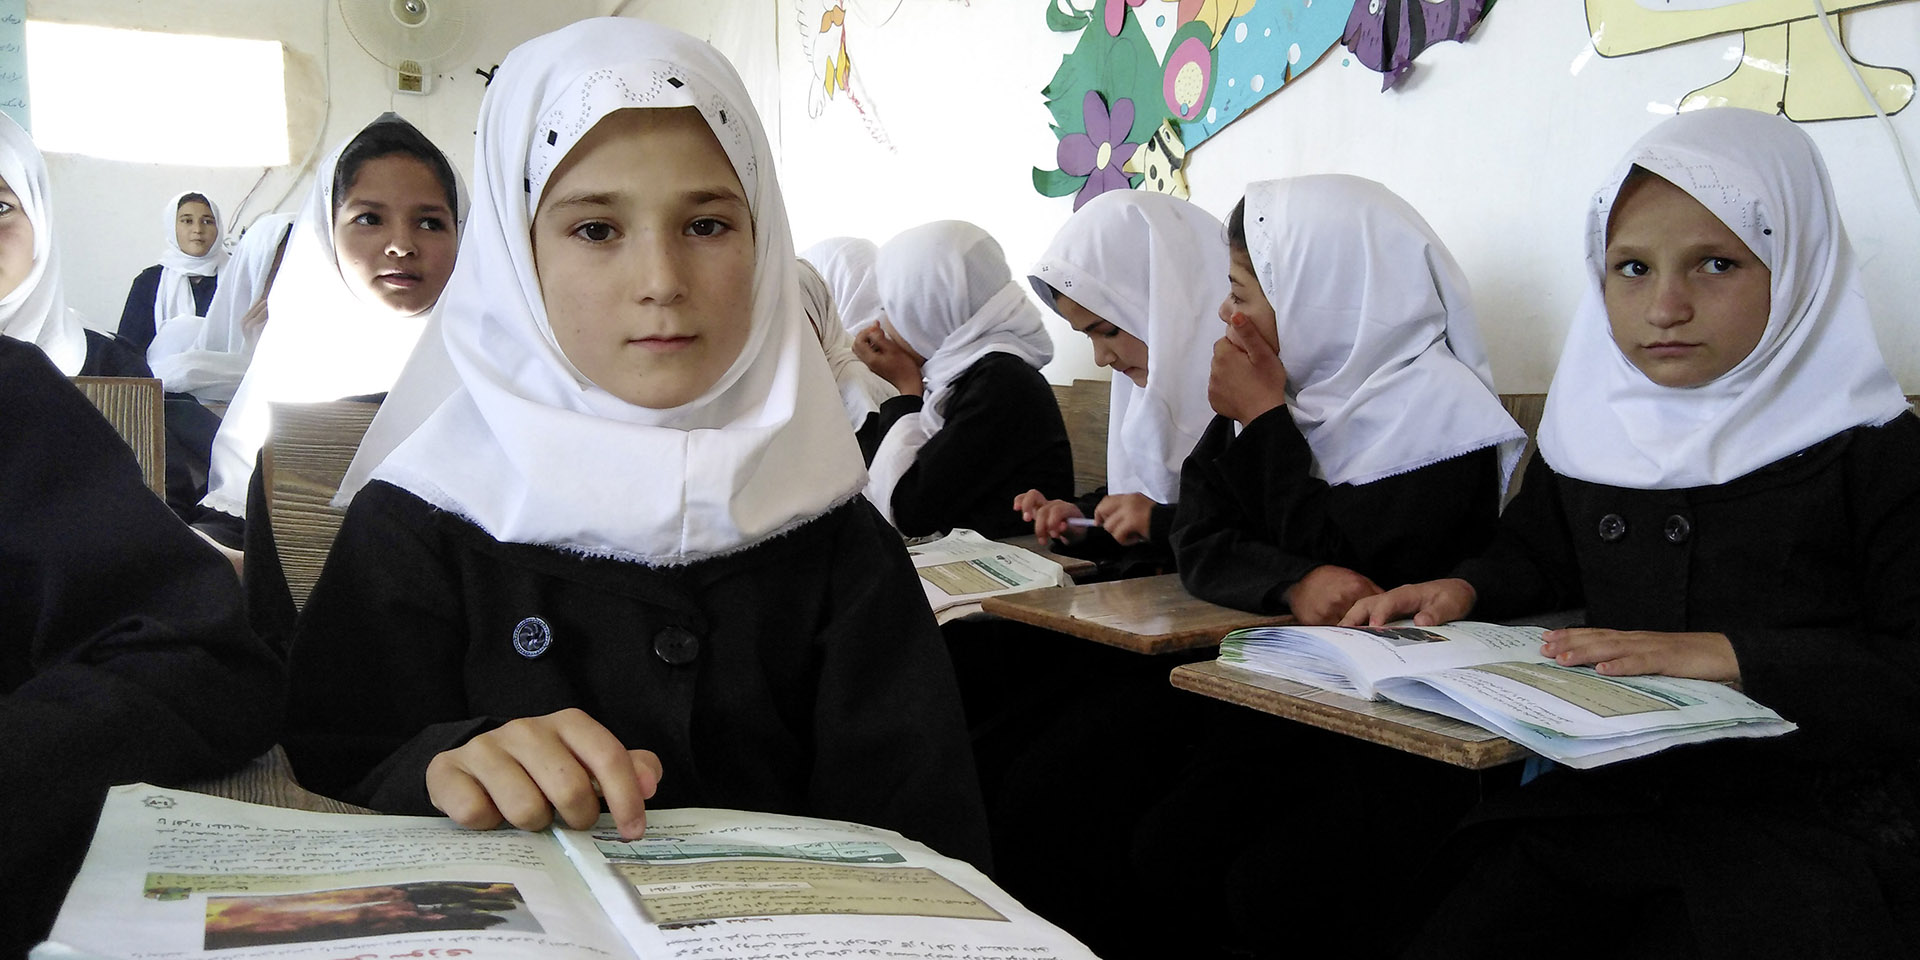 Girls wearing a veil in the foreground. They are in a classroom reading a textbook.